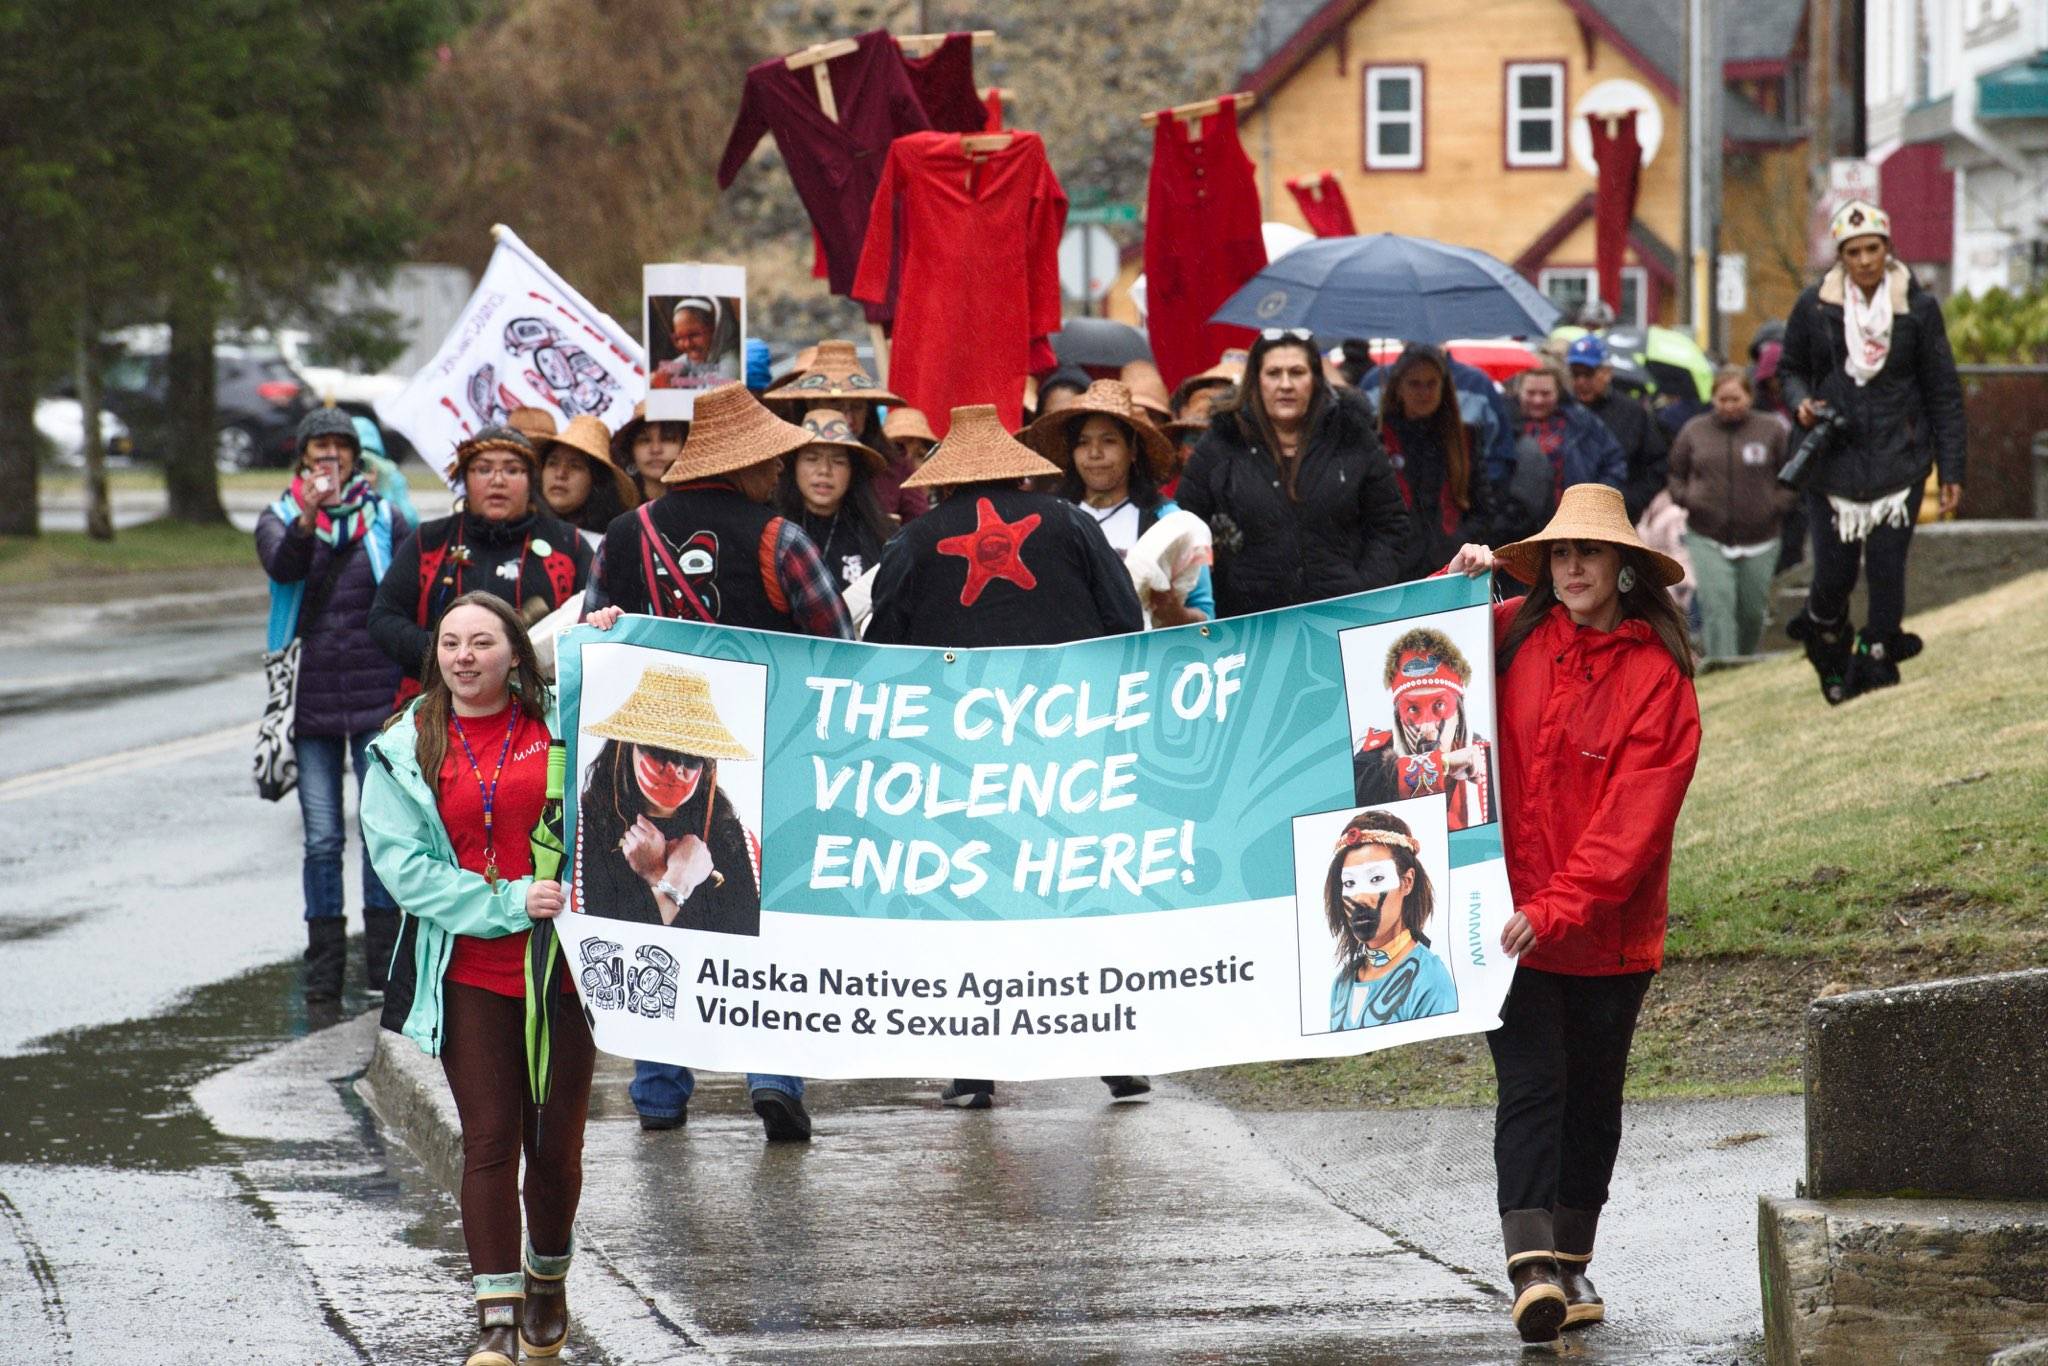 The second annual Central Council of the Tlingit and Haida Indian Tribes of Alaska’s Violence Against Women Awareness March and Rally makes its way from Elizabeth Peratrovich Hall to Sealaska Plaza on Tuesday, April 9, 2019. (Michael Penn | Juneau Empire)